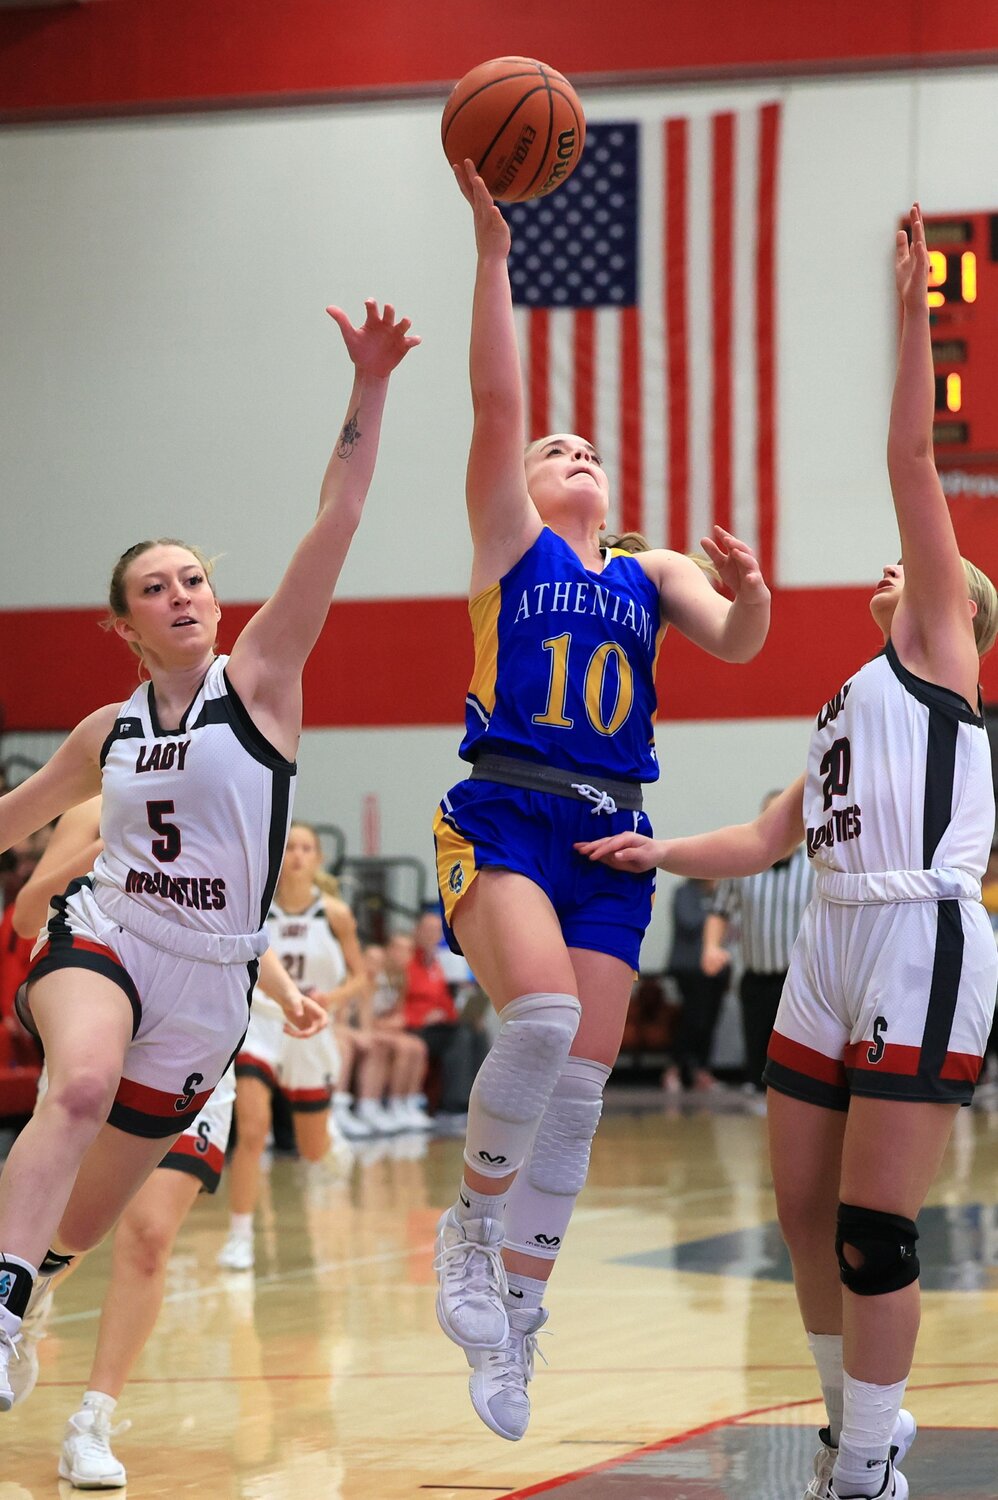 Cville's Molly Pierce goes up for the layup.